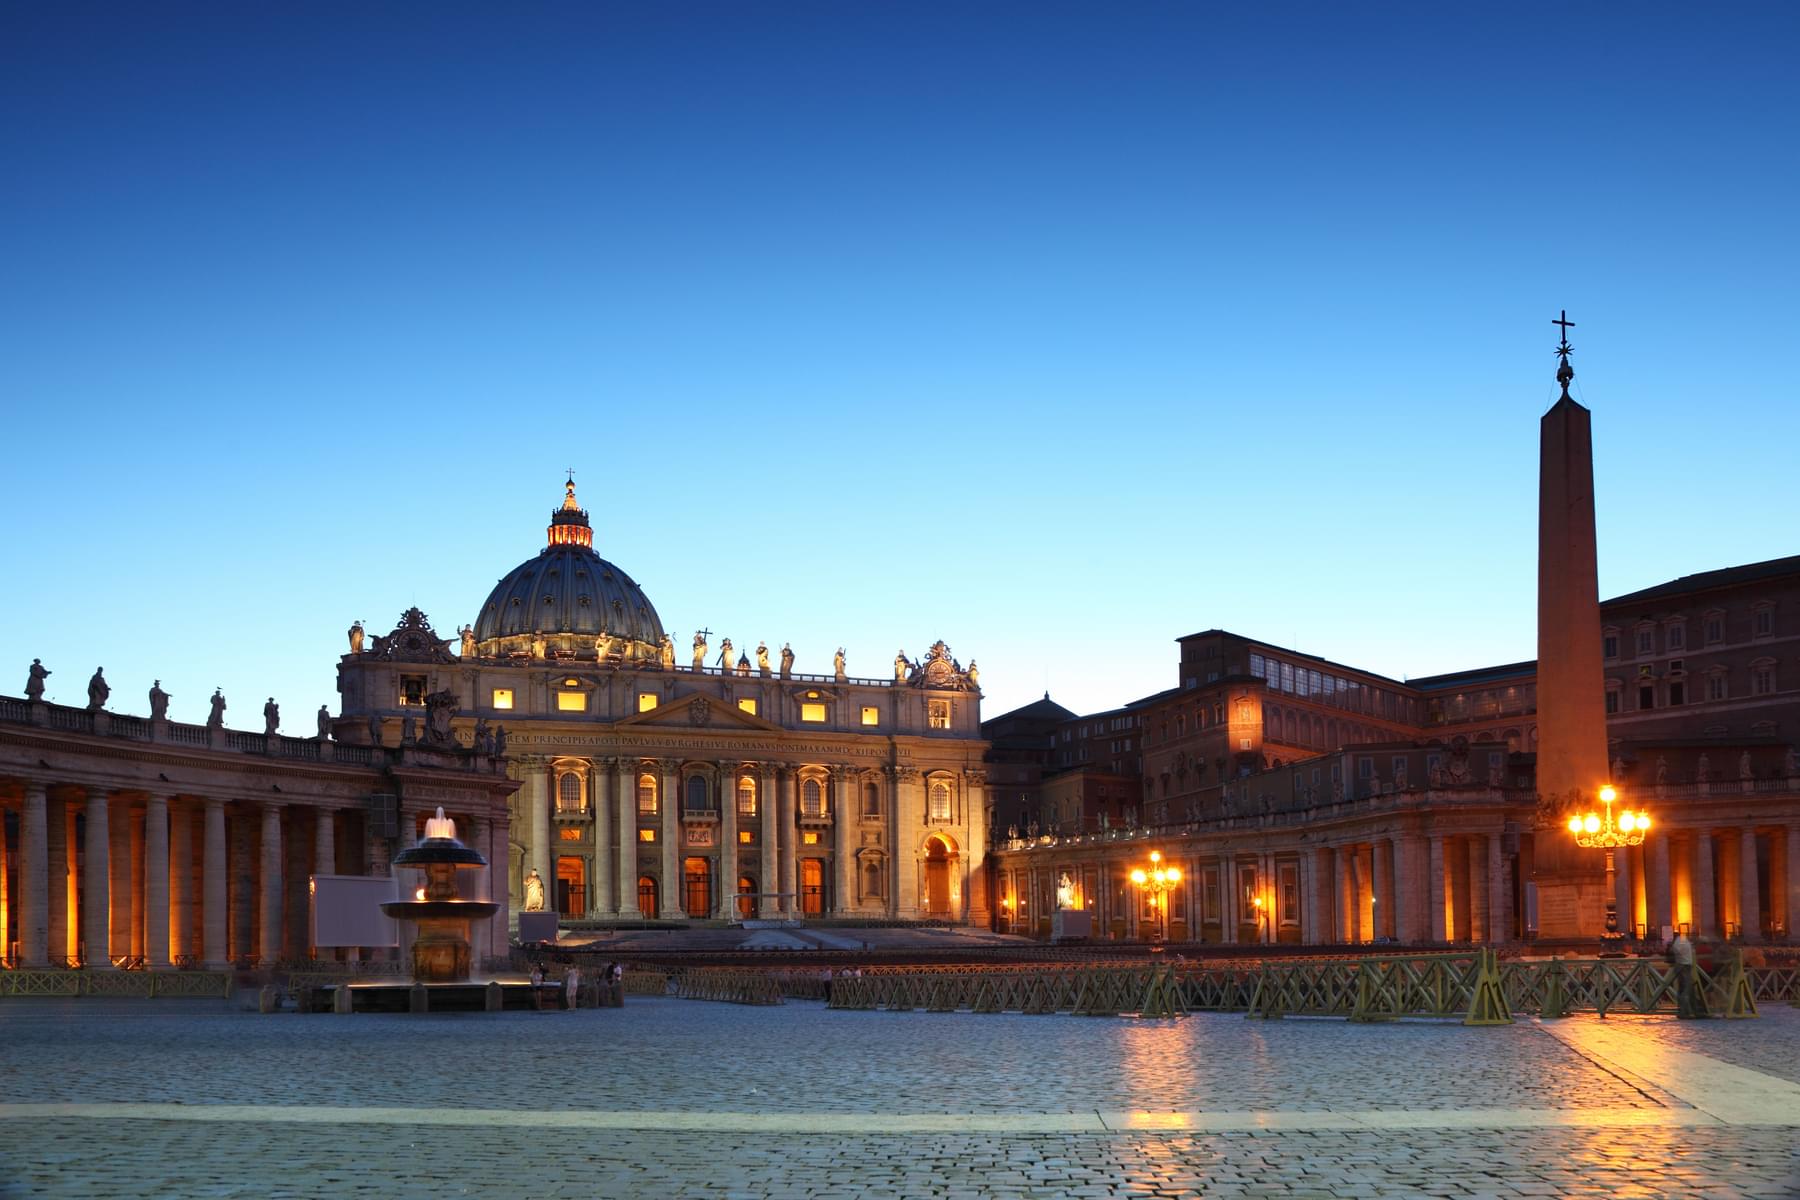 The Armed Forces of Vatican City are Swiss